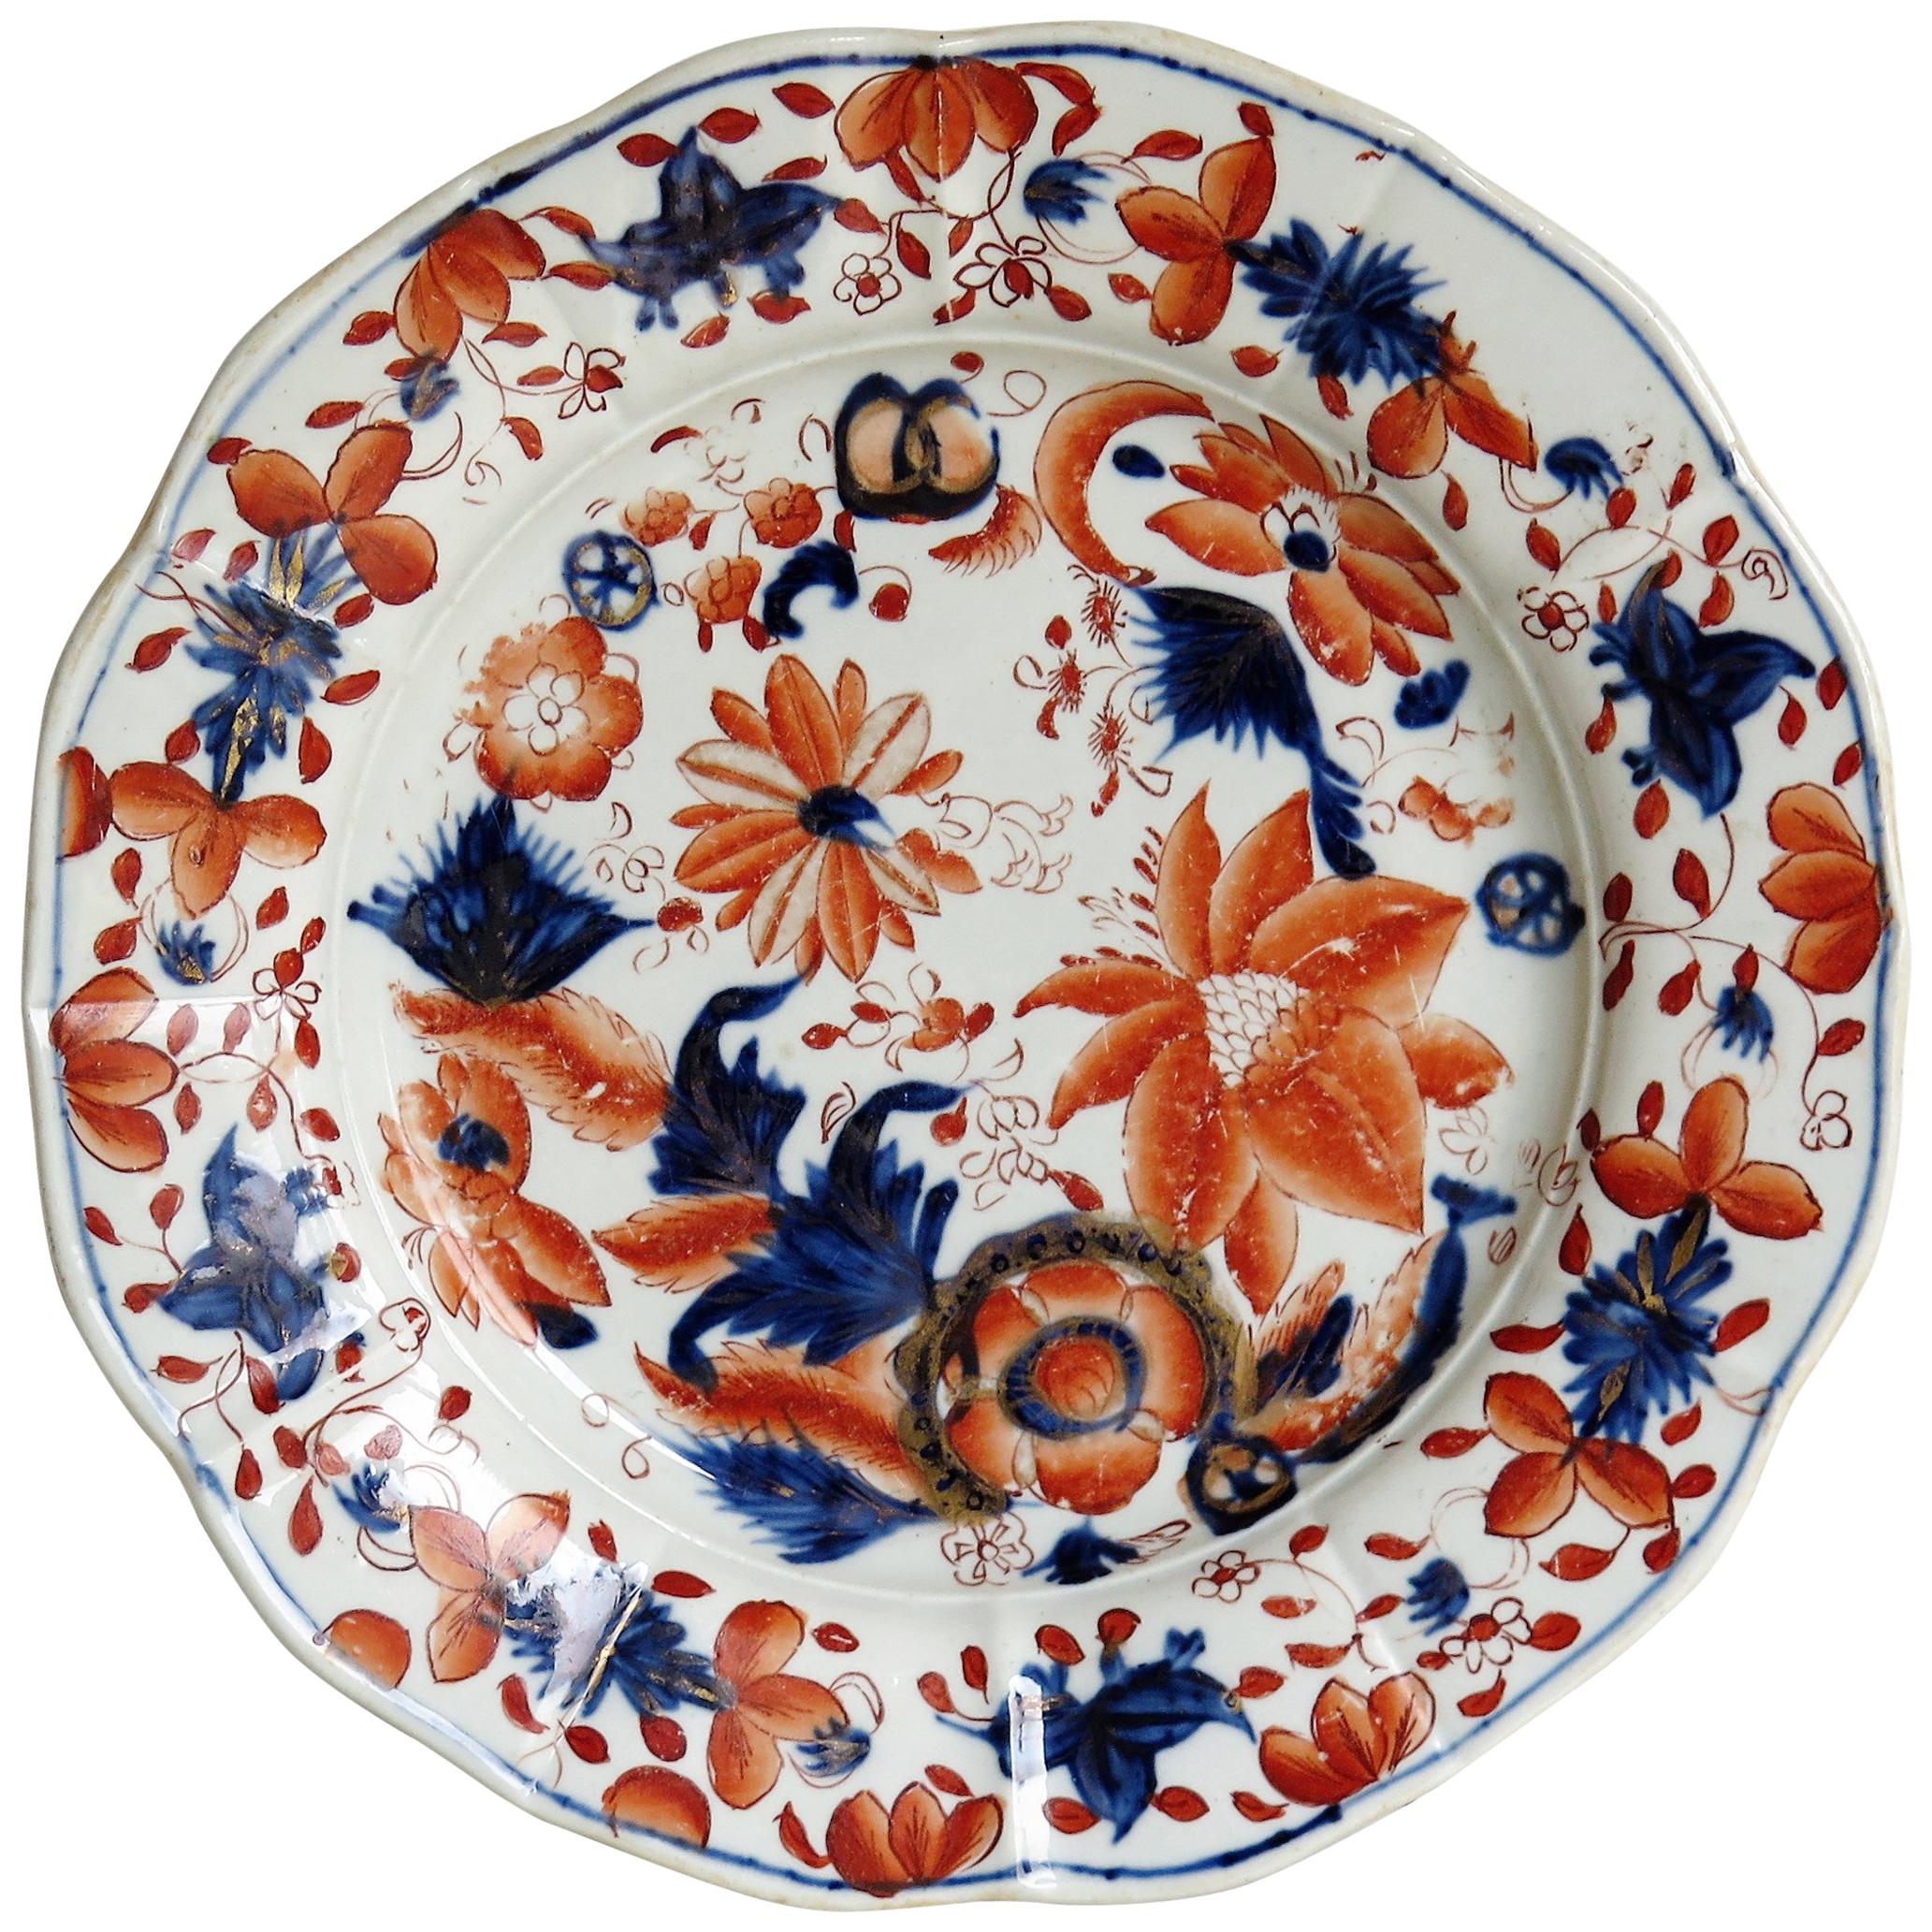 Early Mason's Ironstone Dish or Plate Flowers and Wheels Rare Pattern Circa 1815